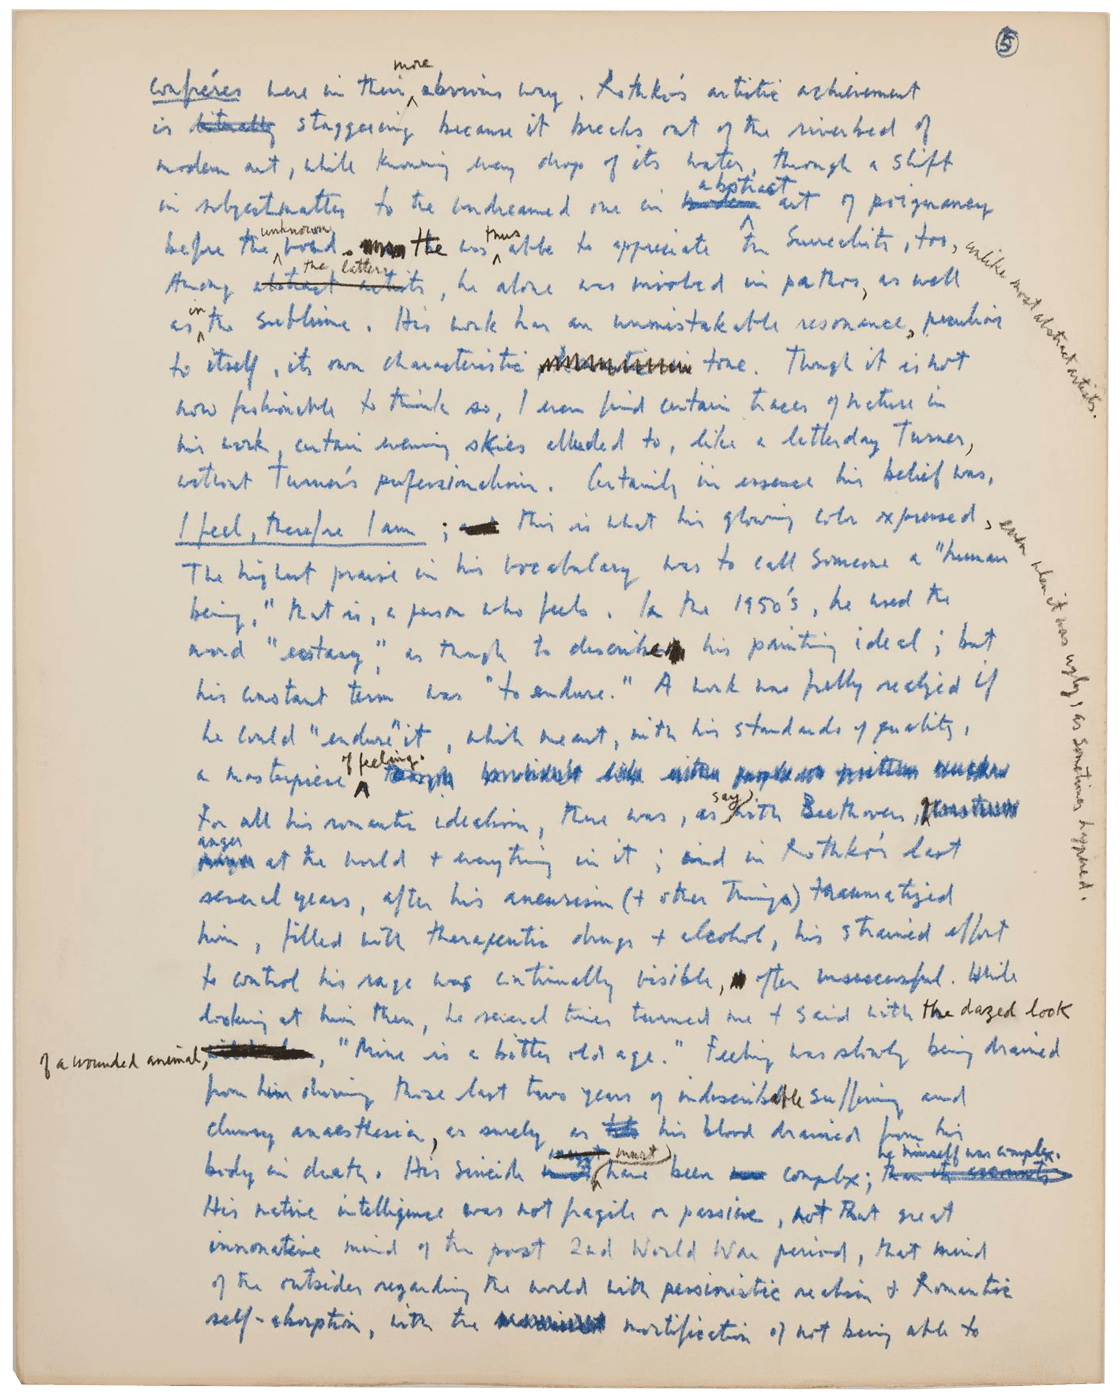 A page from Motherwell's handwritten draft of "On Rothko", 1970